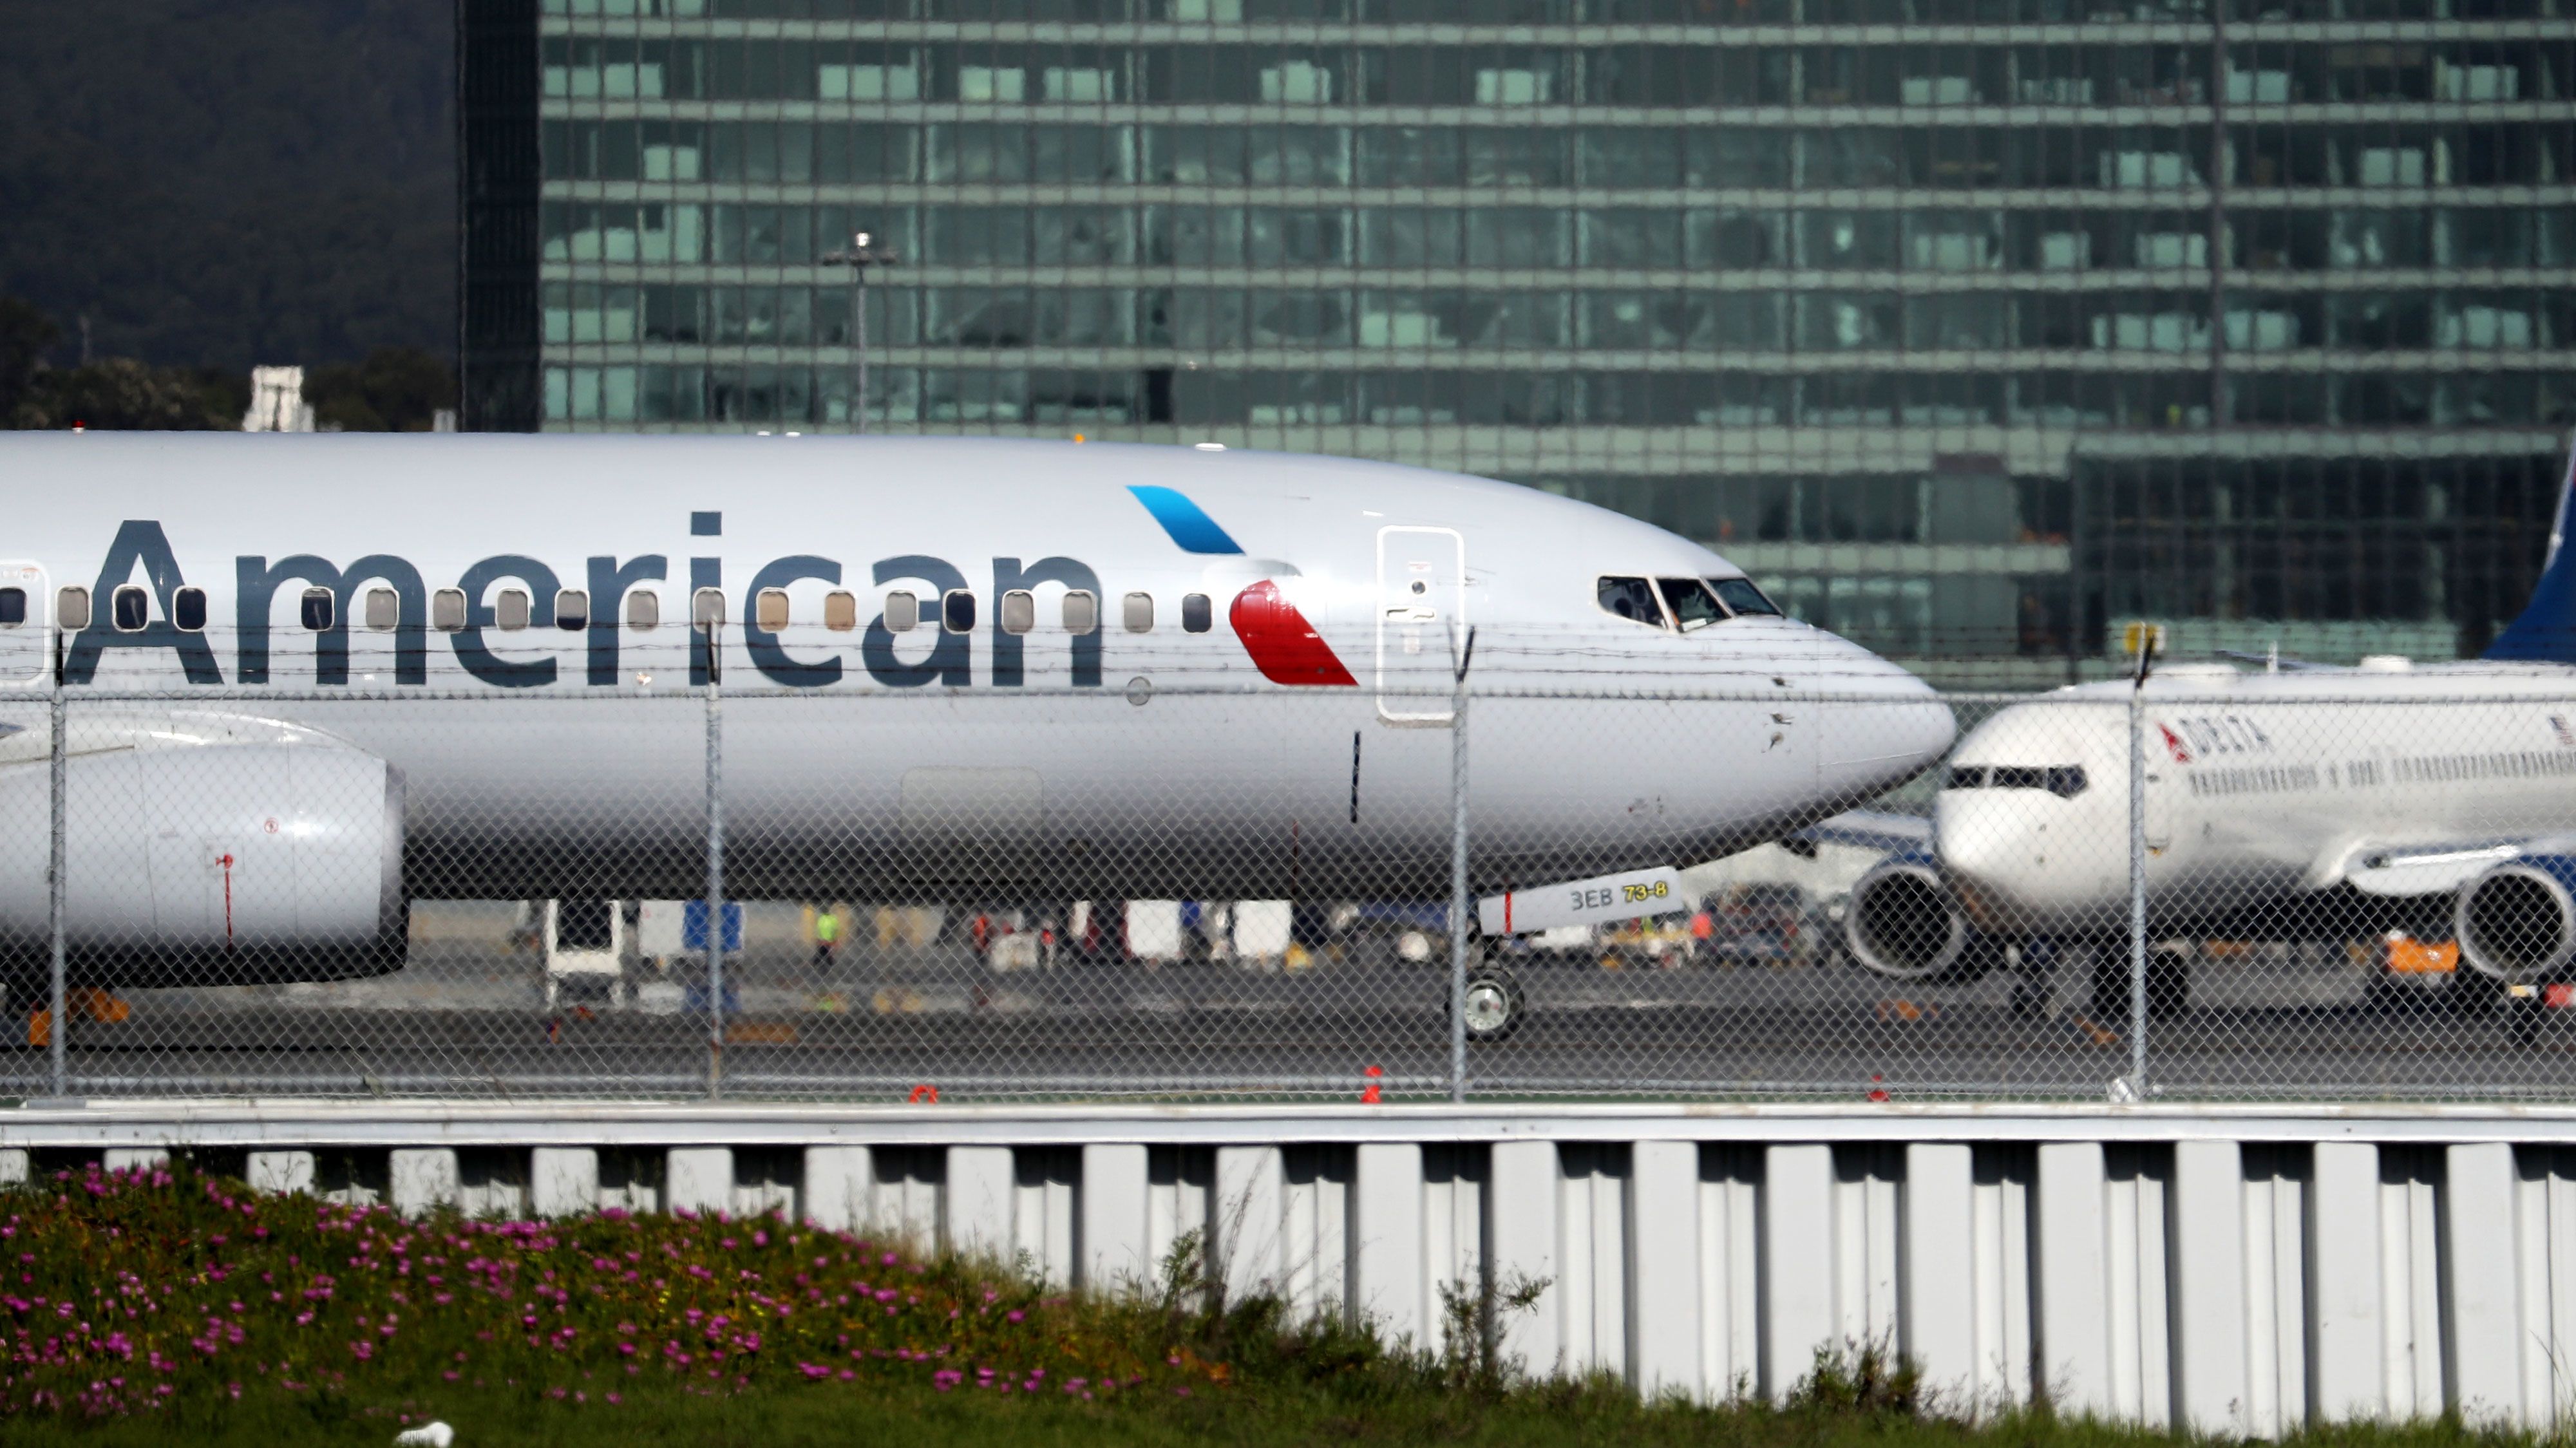 American Airlines adds new perks for internation business travelers